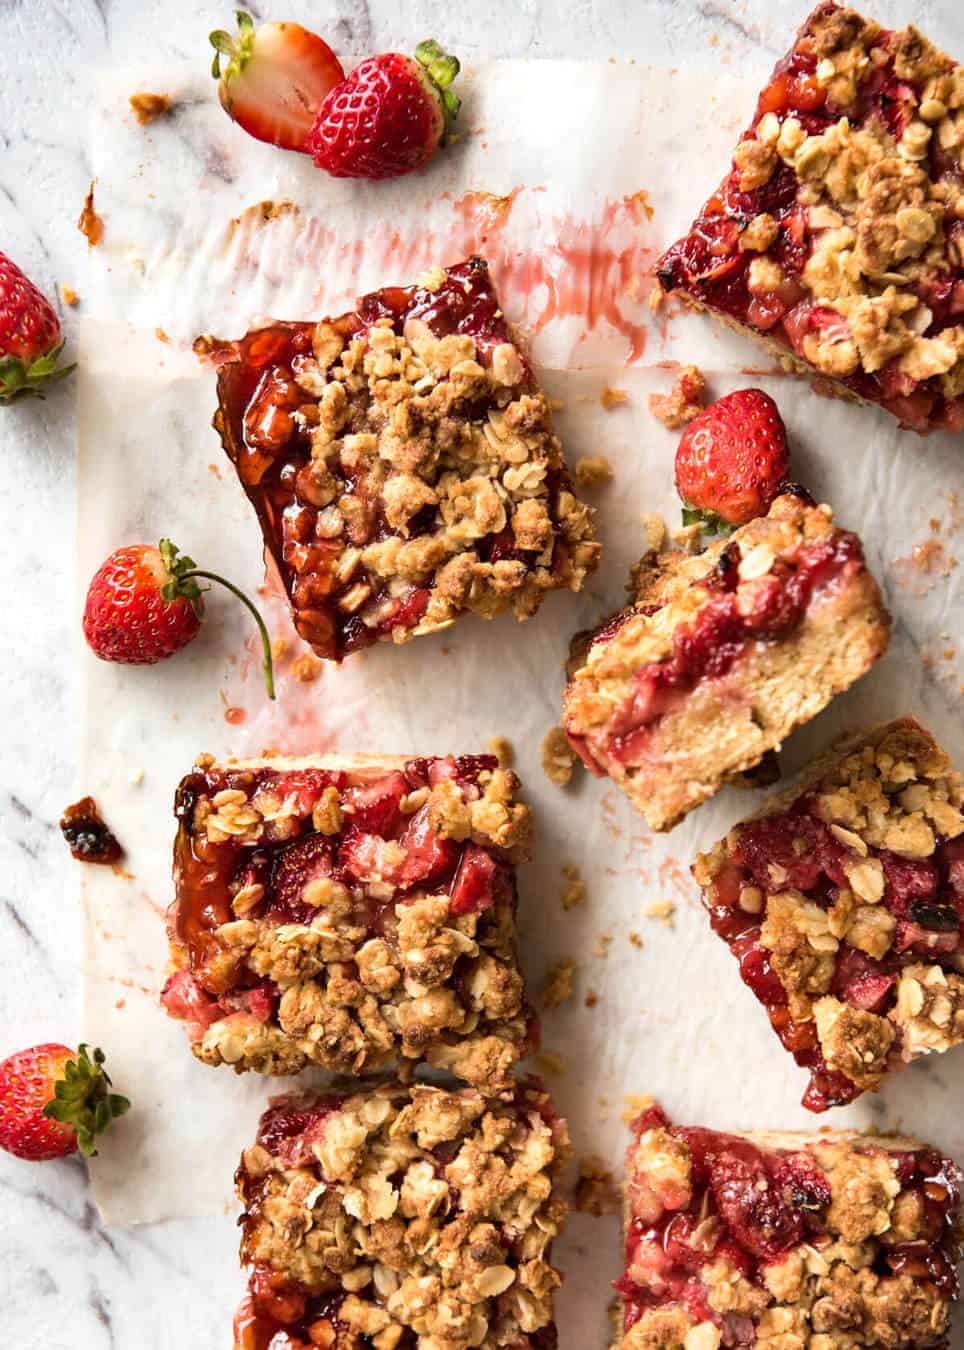 Fresh Strawberry Bars with a buttery biscuit base, topped with jam, fresh strawberries and a crumbly topping. No mixer, quick to make! www.recipetineats.com